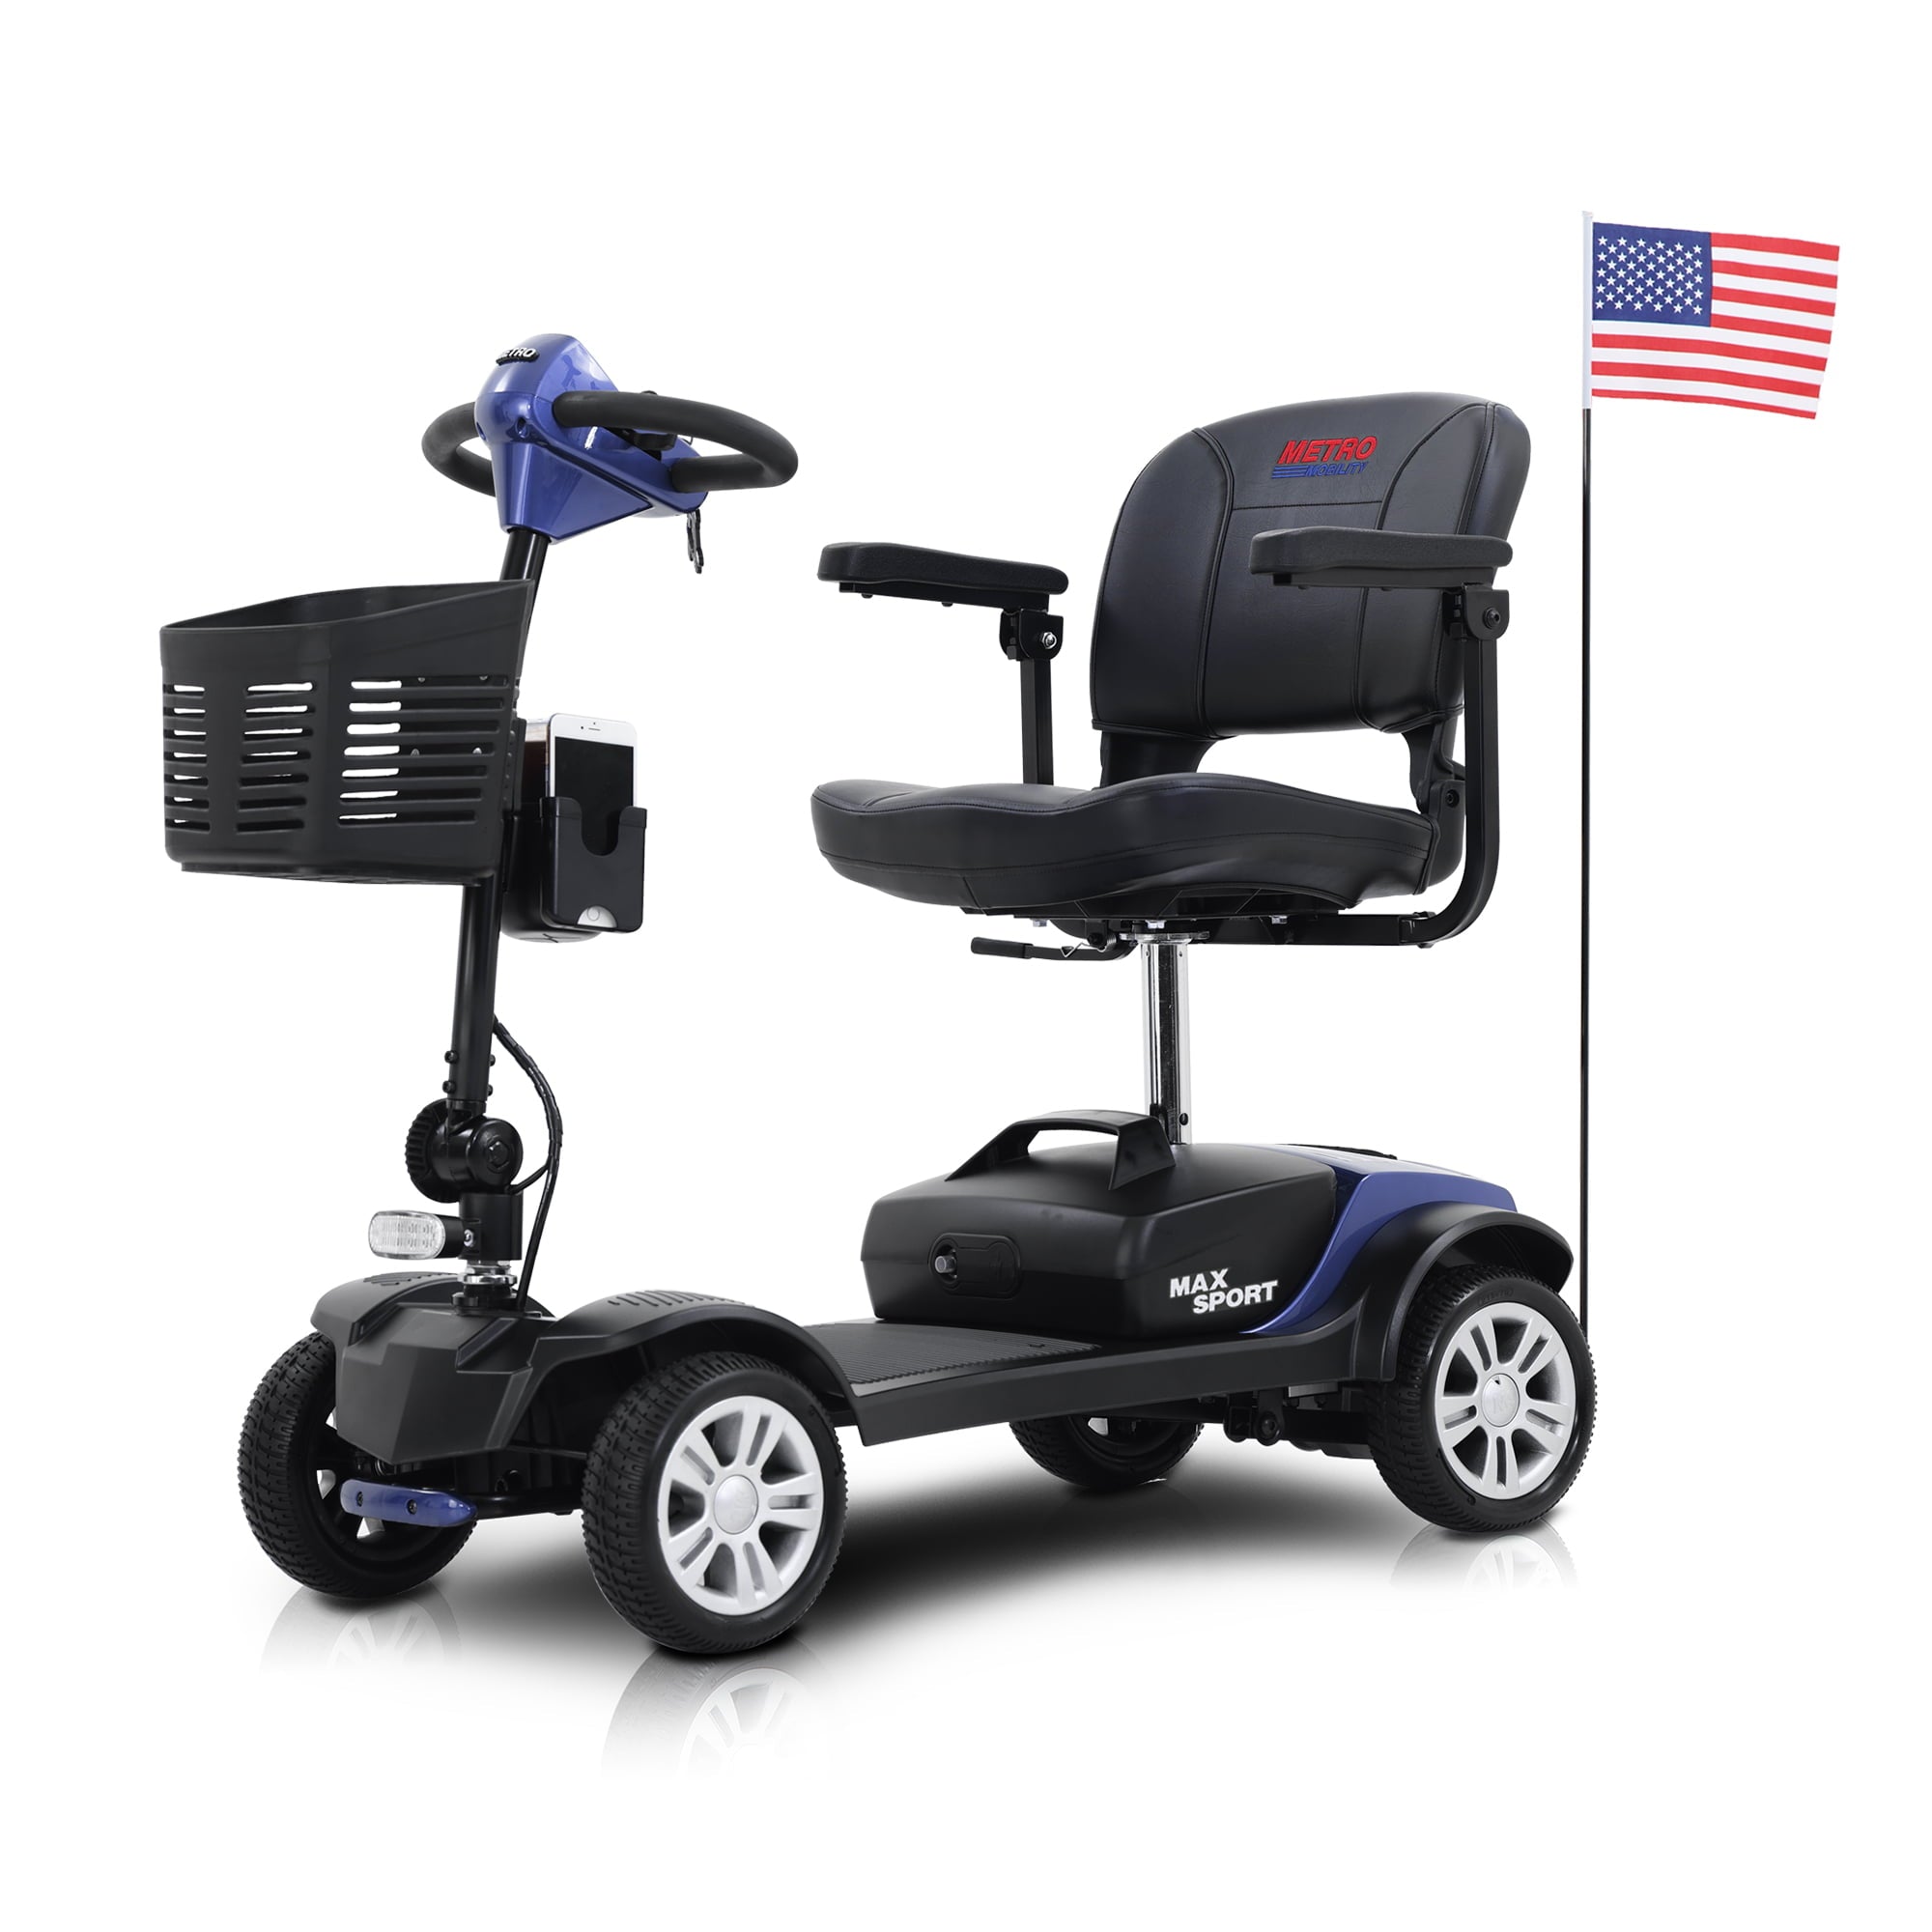 Walmeck SPORT BLUE 4 Wheels Outdoor Compact Mobility Scooter with 2 in 1 Cup & Phone Holder